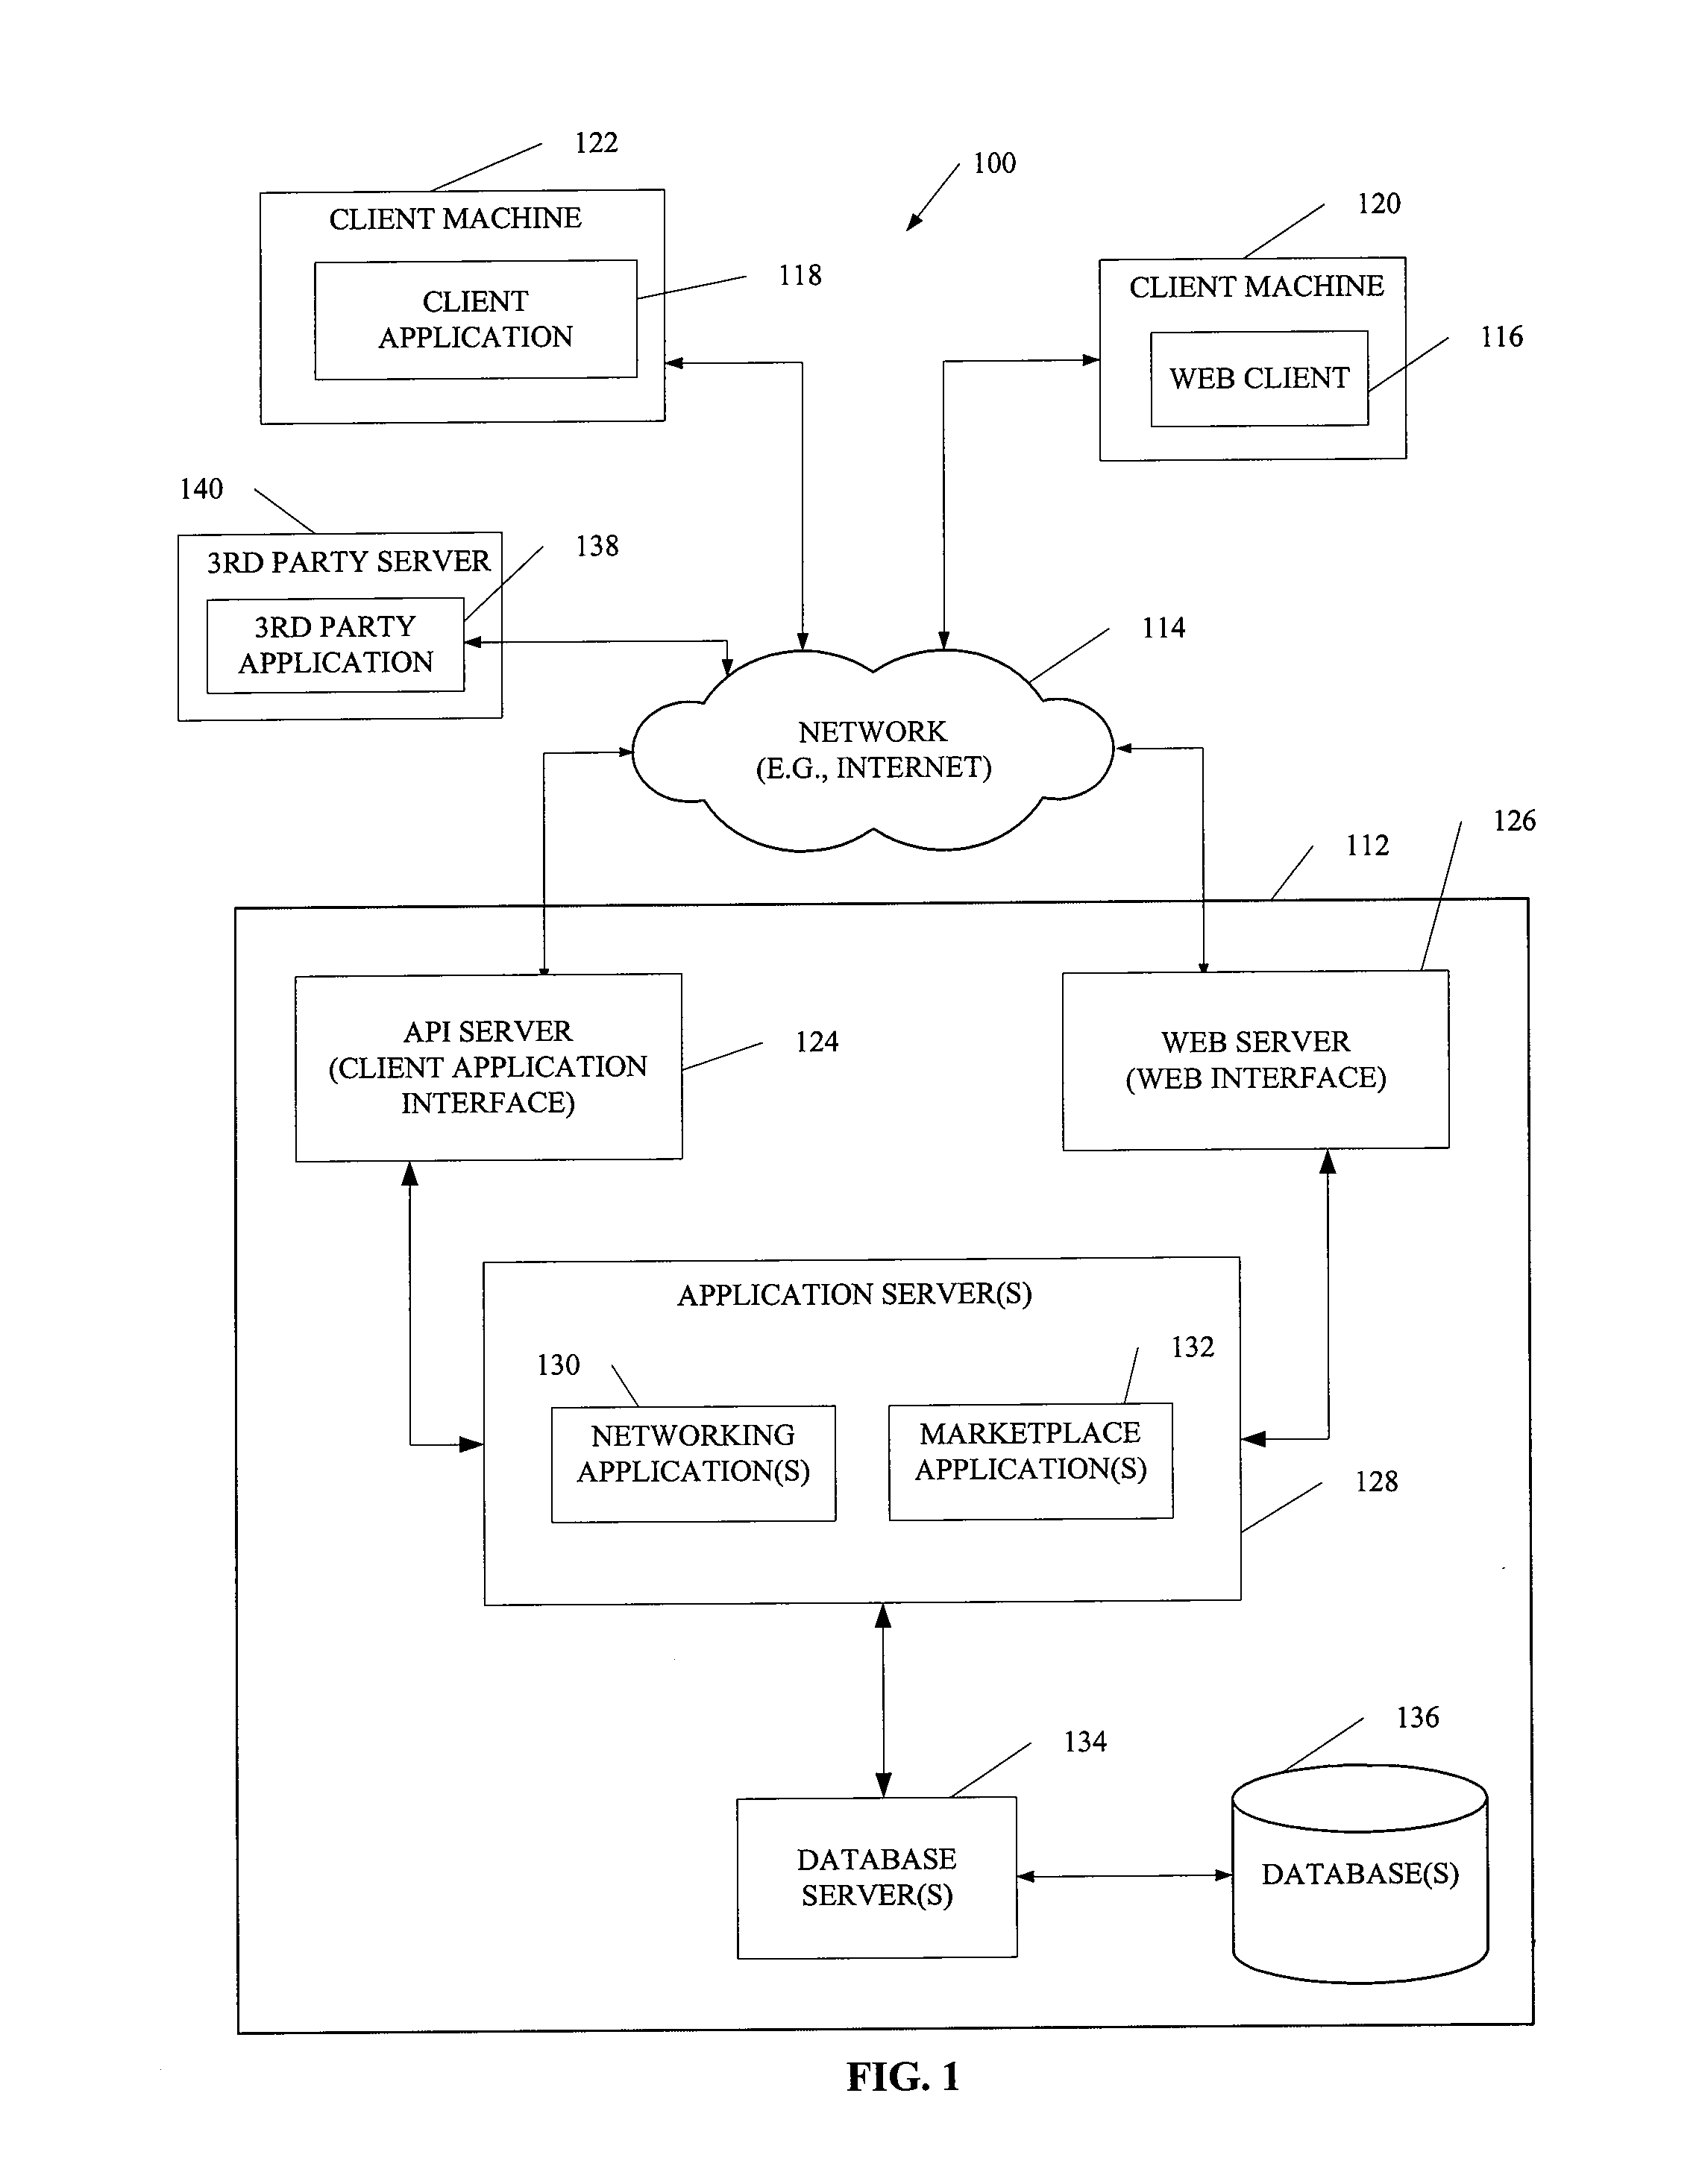 System and method enabling searching for items, listings, or products based on listing activity